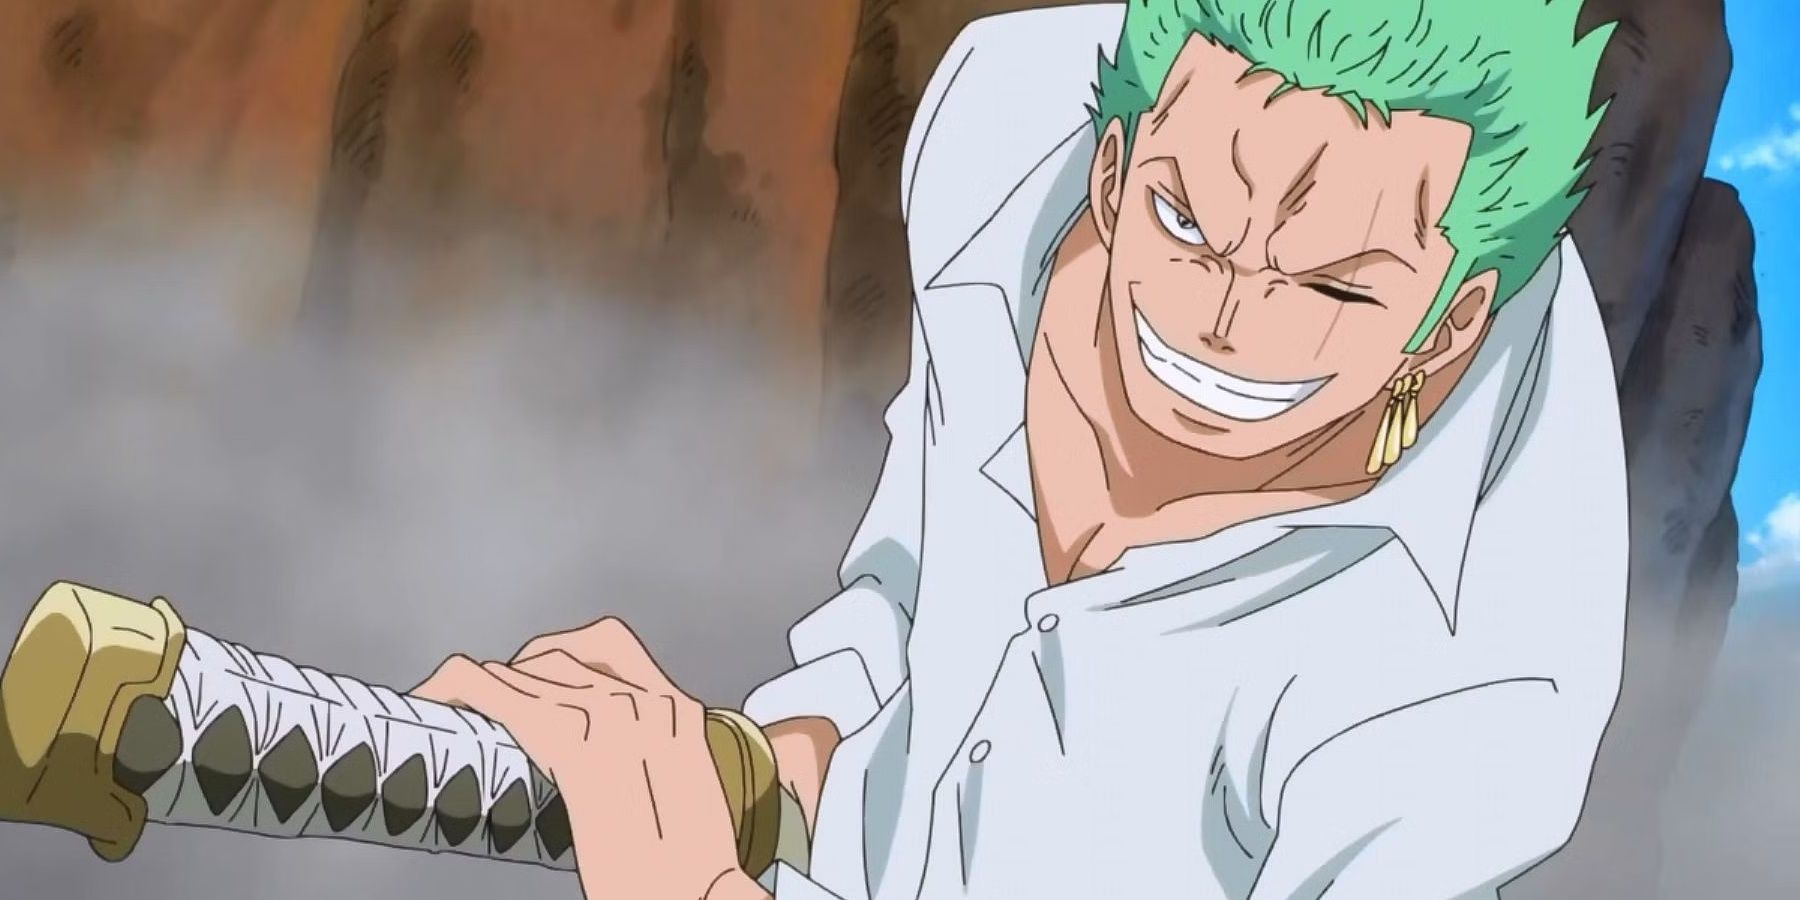 Roronoa Zoro is grinning while preparing his sword in One Piece.